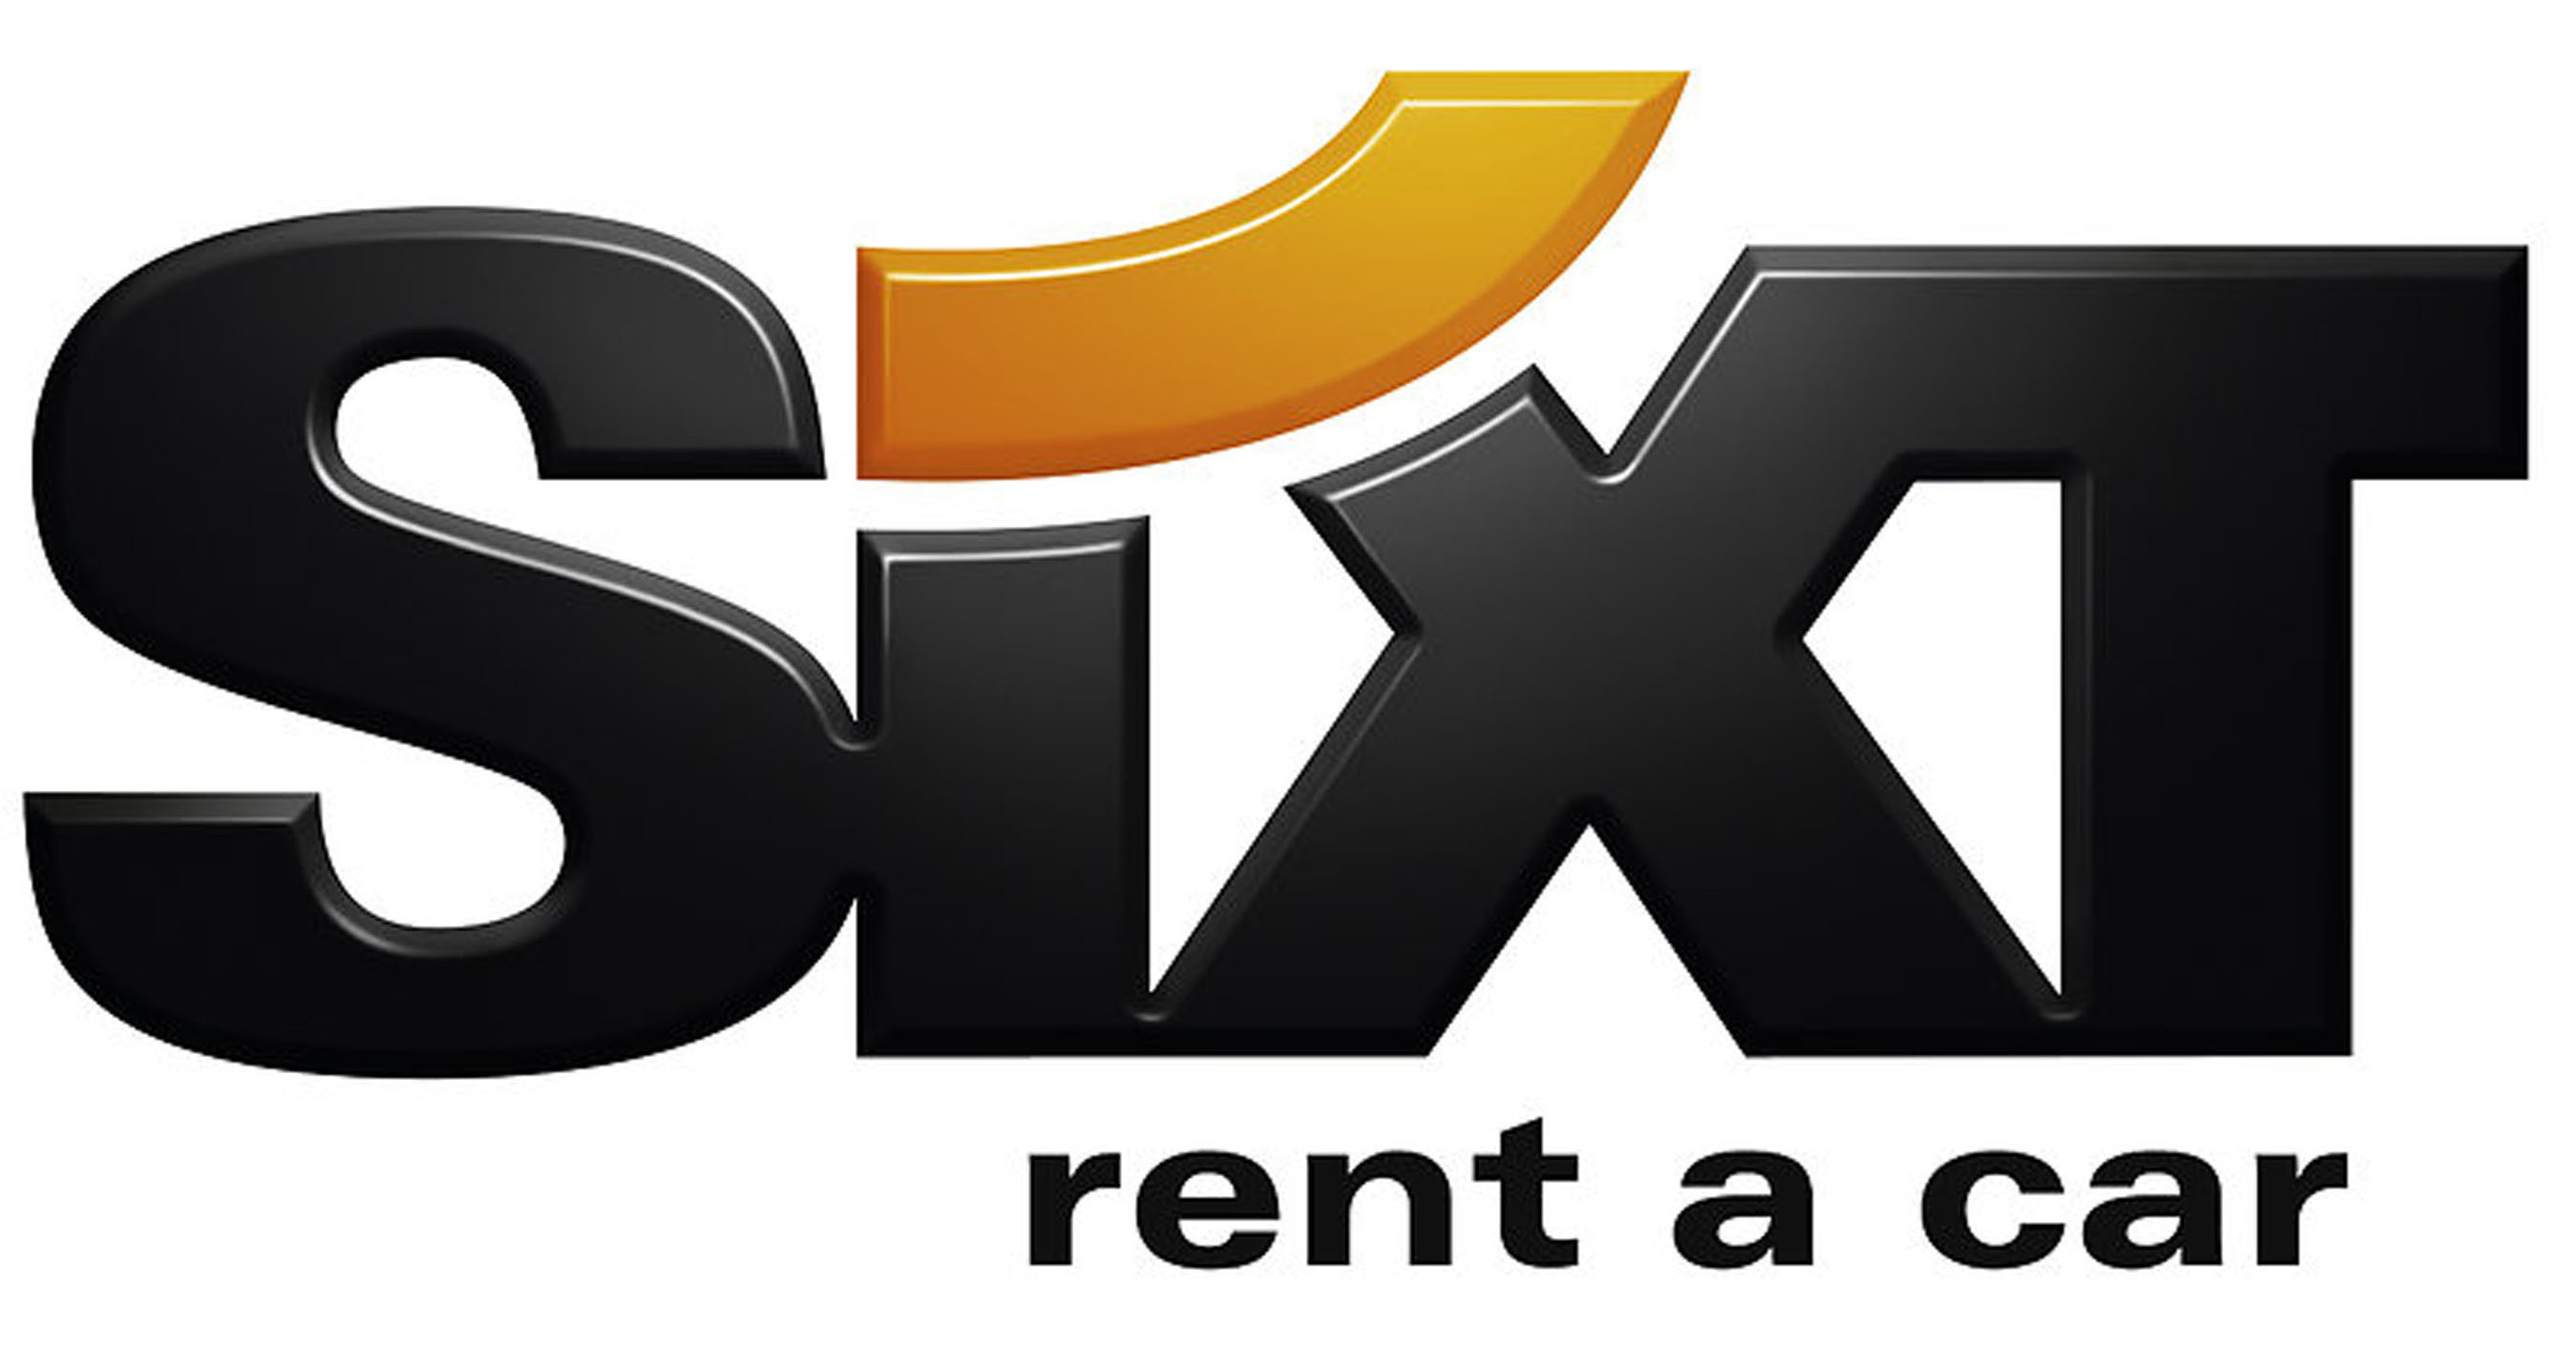 Sixt Surges to 4 Car Rental Brand in America with 366 Million USD